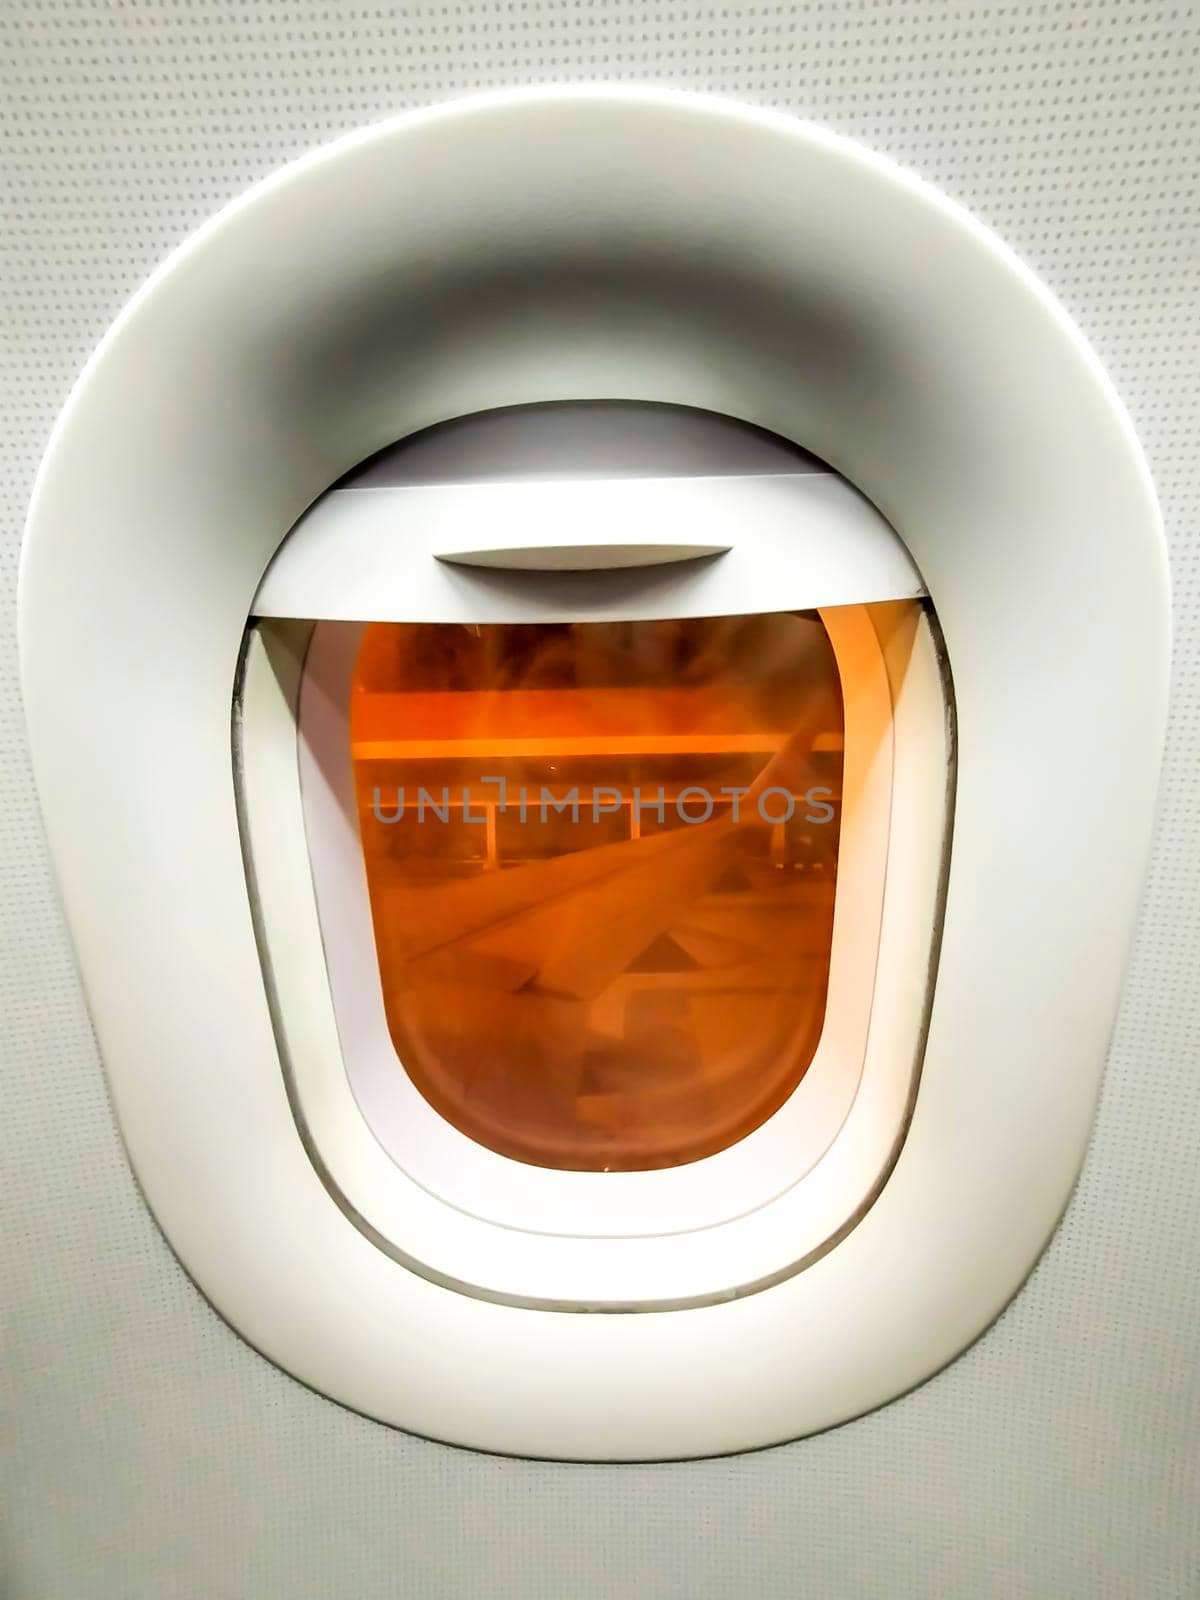 Perfect airplane window pictures. Plane window. Airplane view and Airplane window. Travel concept idea by Petrichor